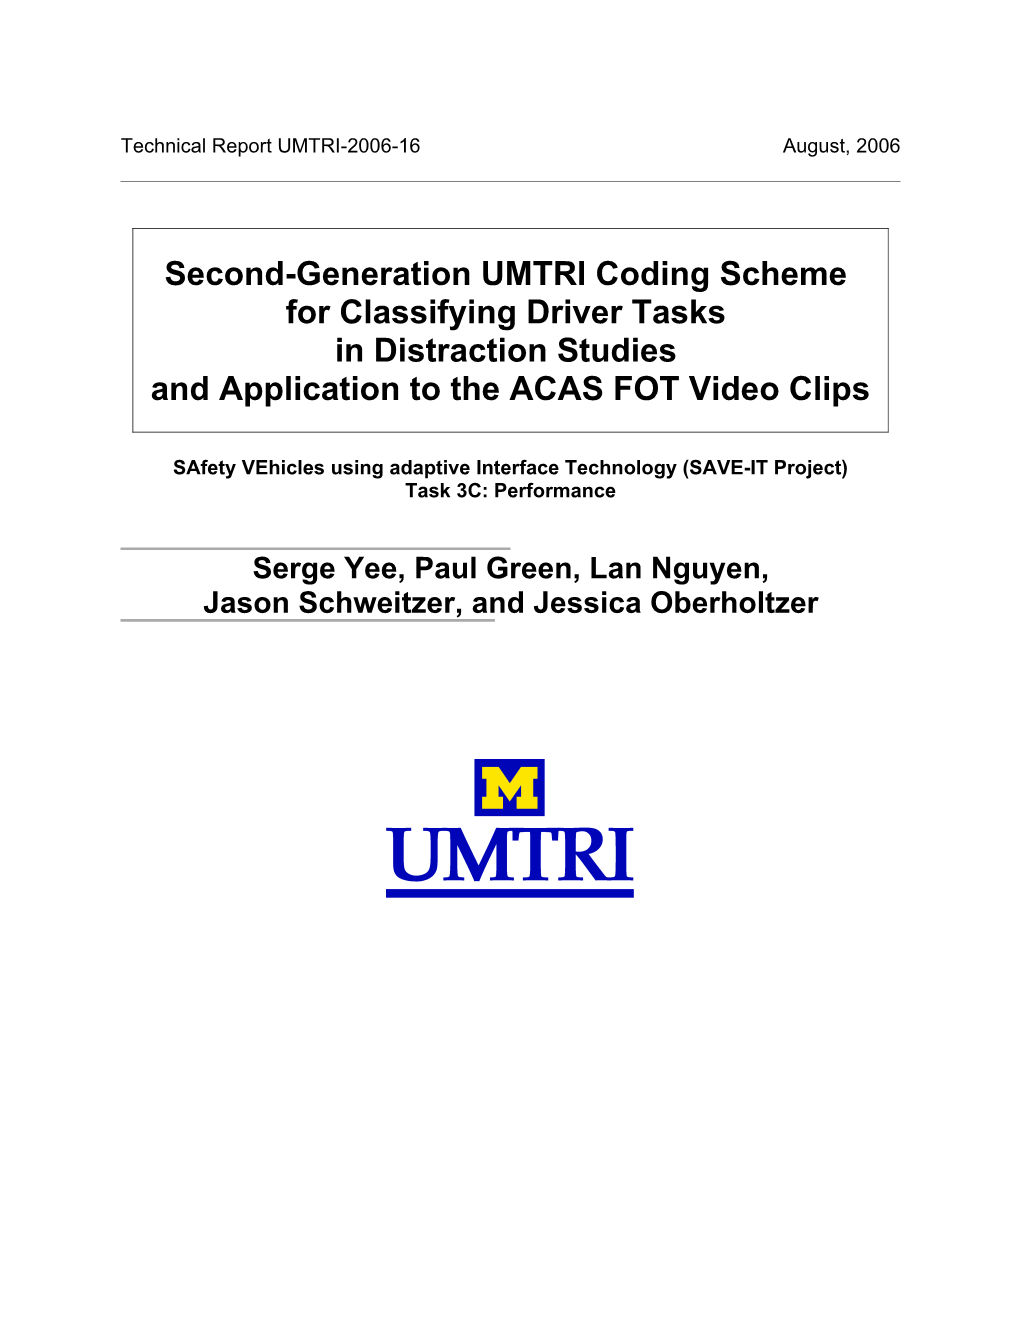 Technical Report UMTRI-2005